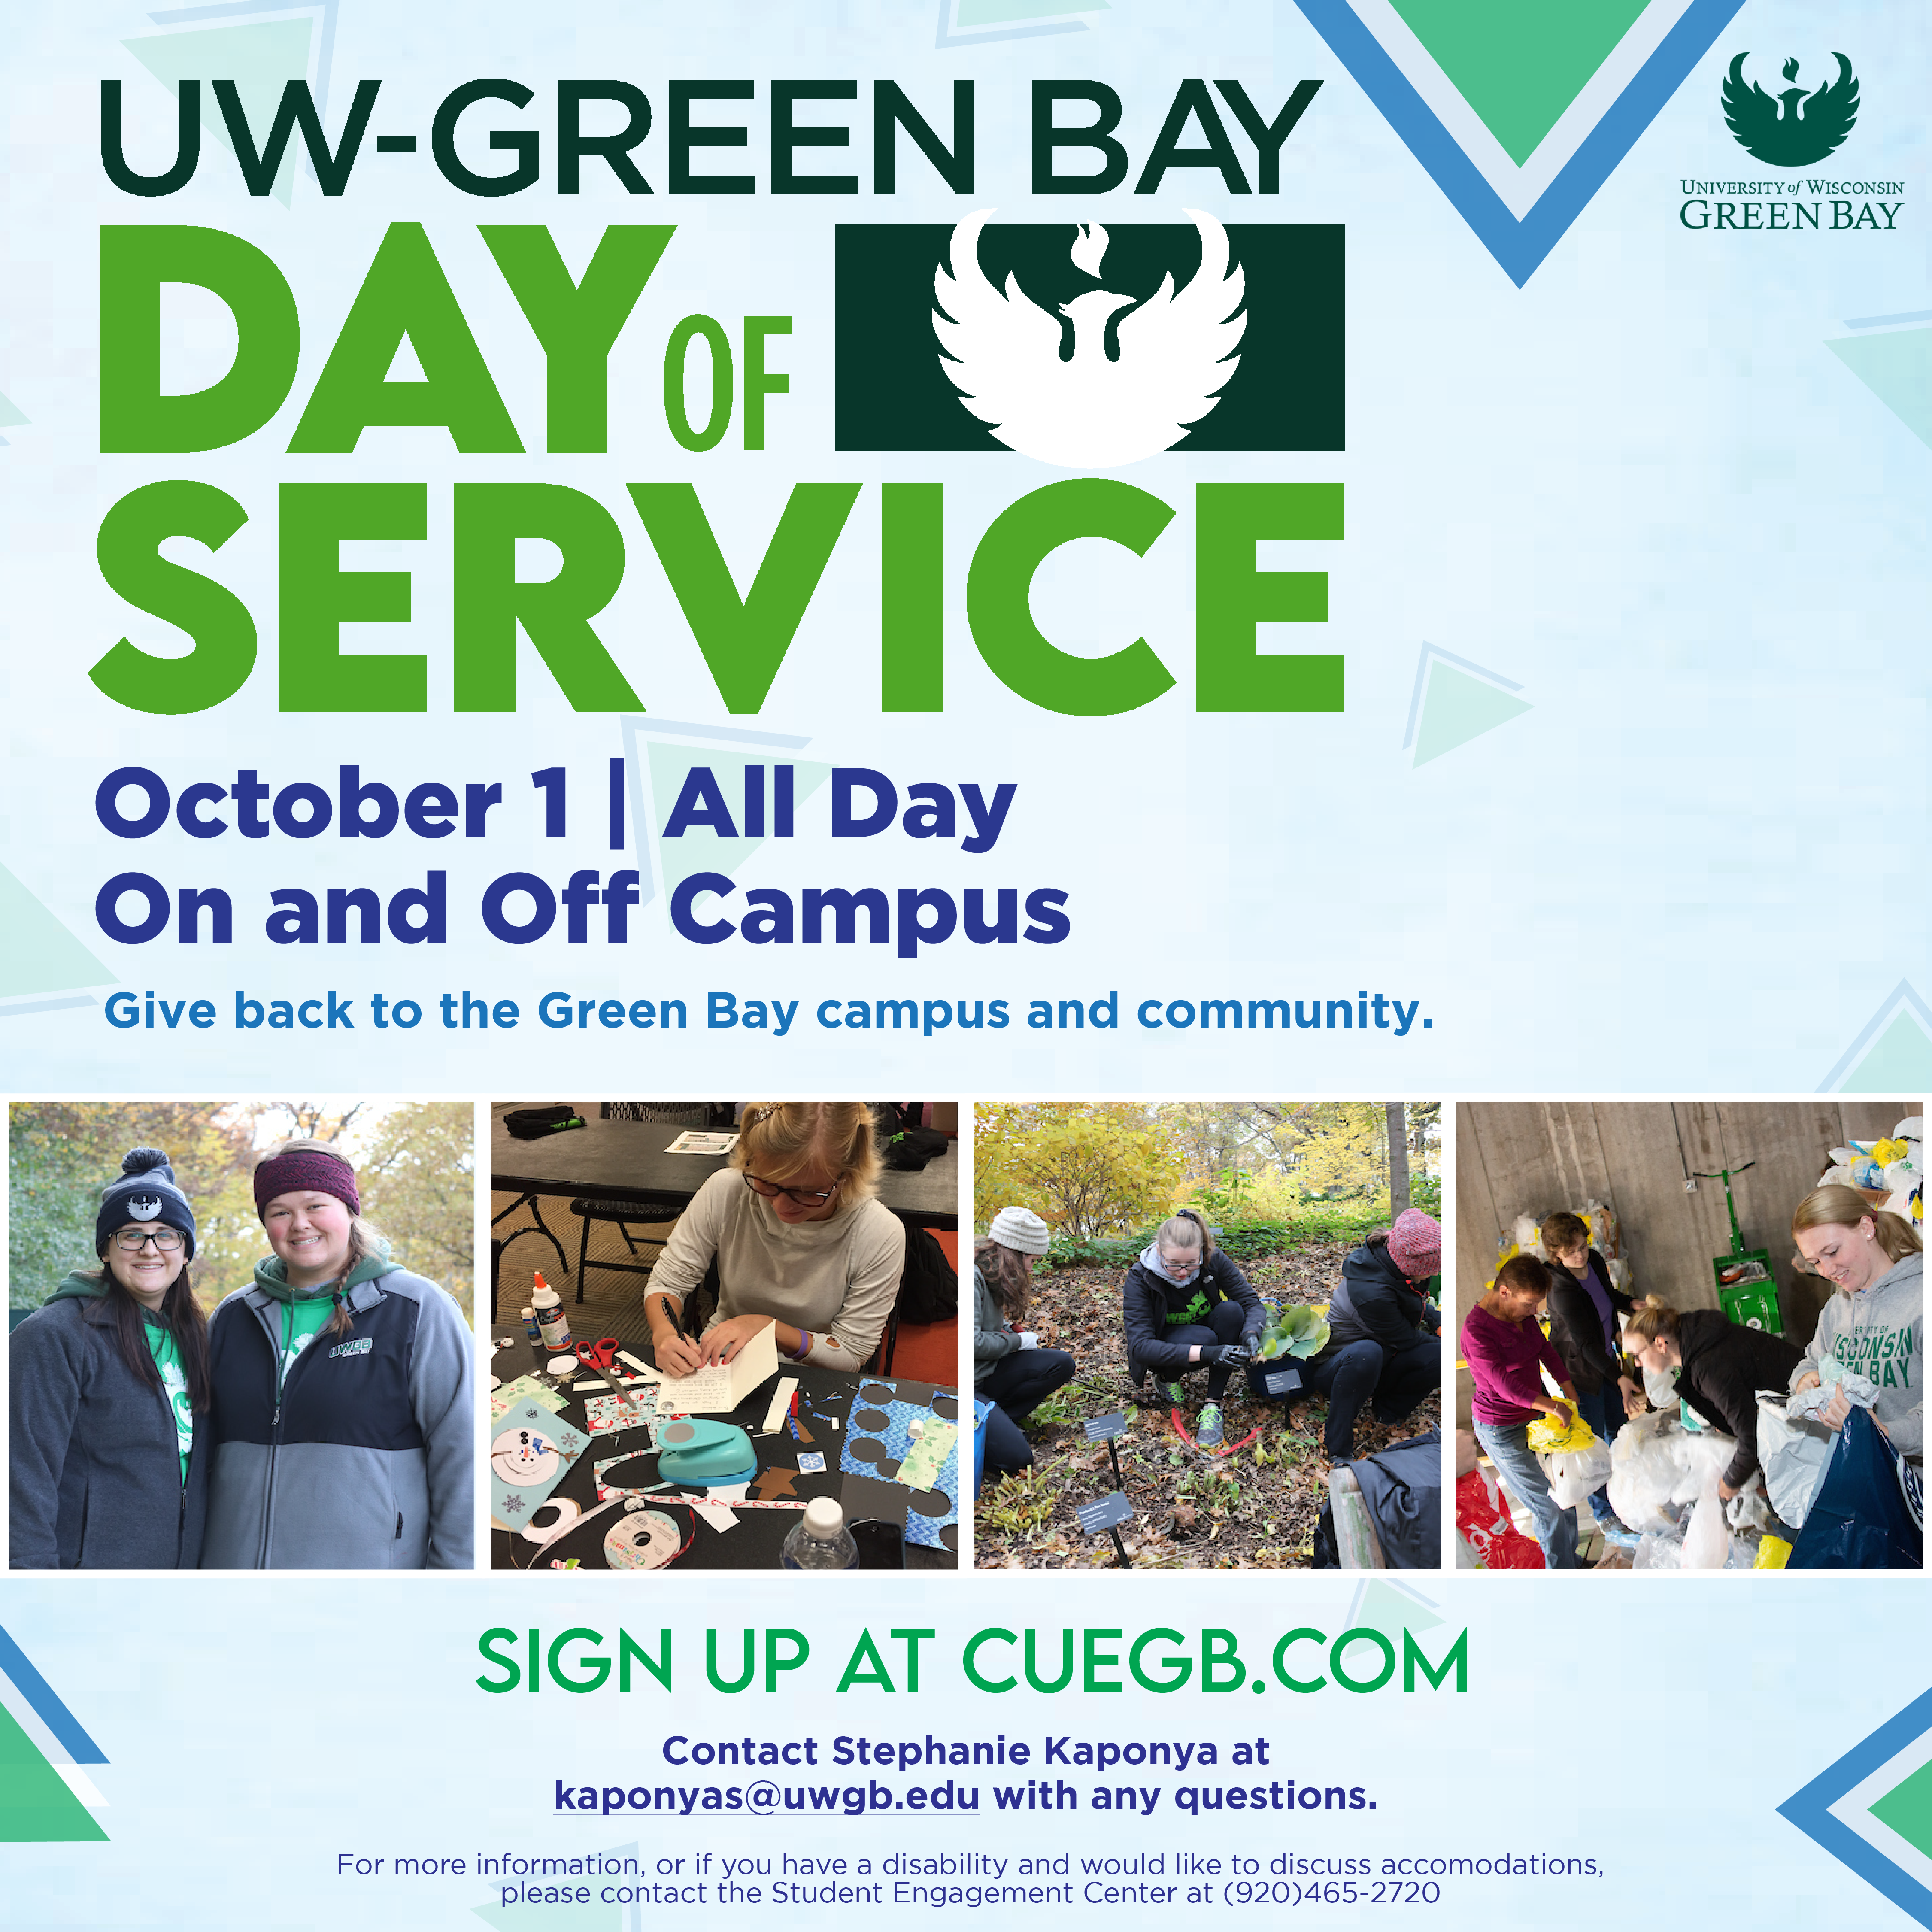 UW-Green Bay Day of Service | October 1, All day | on and off campus | Give back to the Green Bay campus and community | Sign up at CUEGB.com | Contact Stephanie Kaponya at kaponyas@uwgb.edu with any questions | For more information, or if you have a disablility and would like accomodations please contact the Student Engagement Center at 920-465-2720